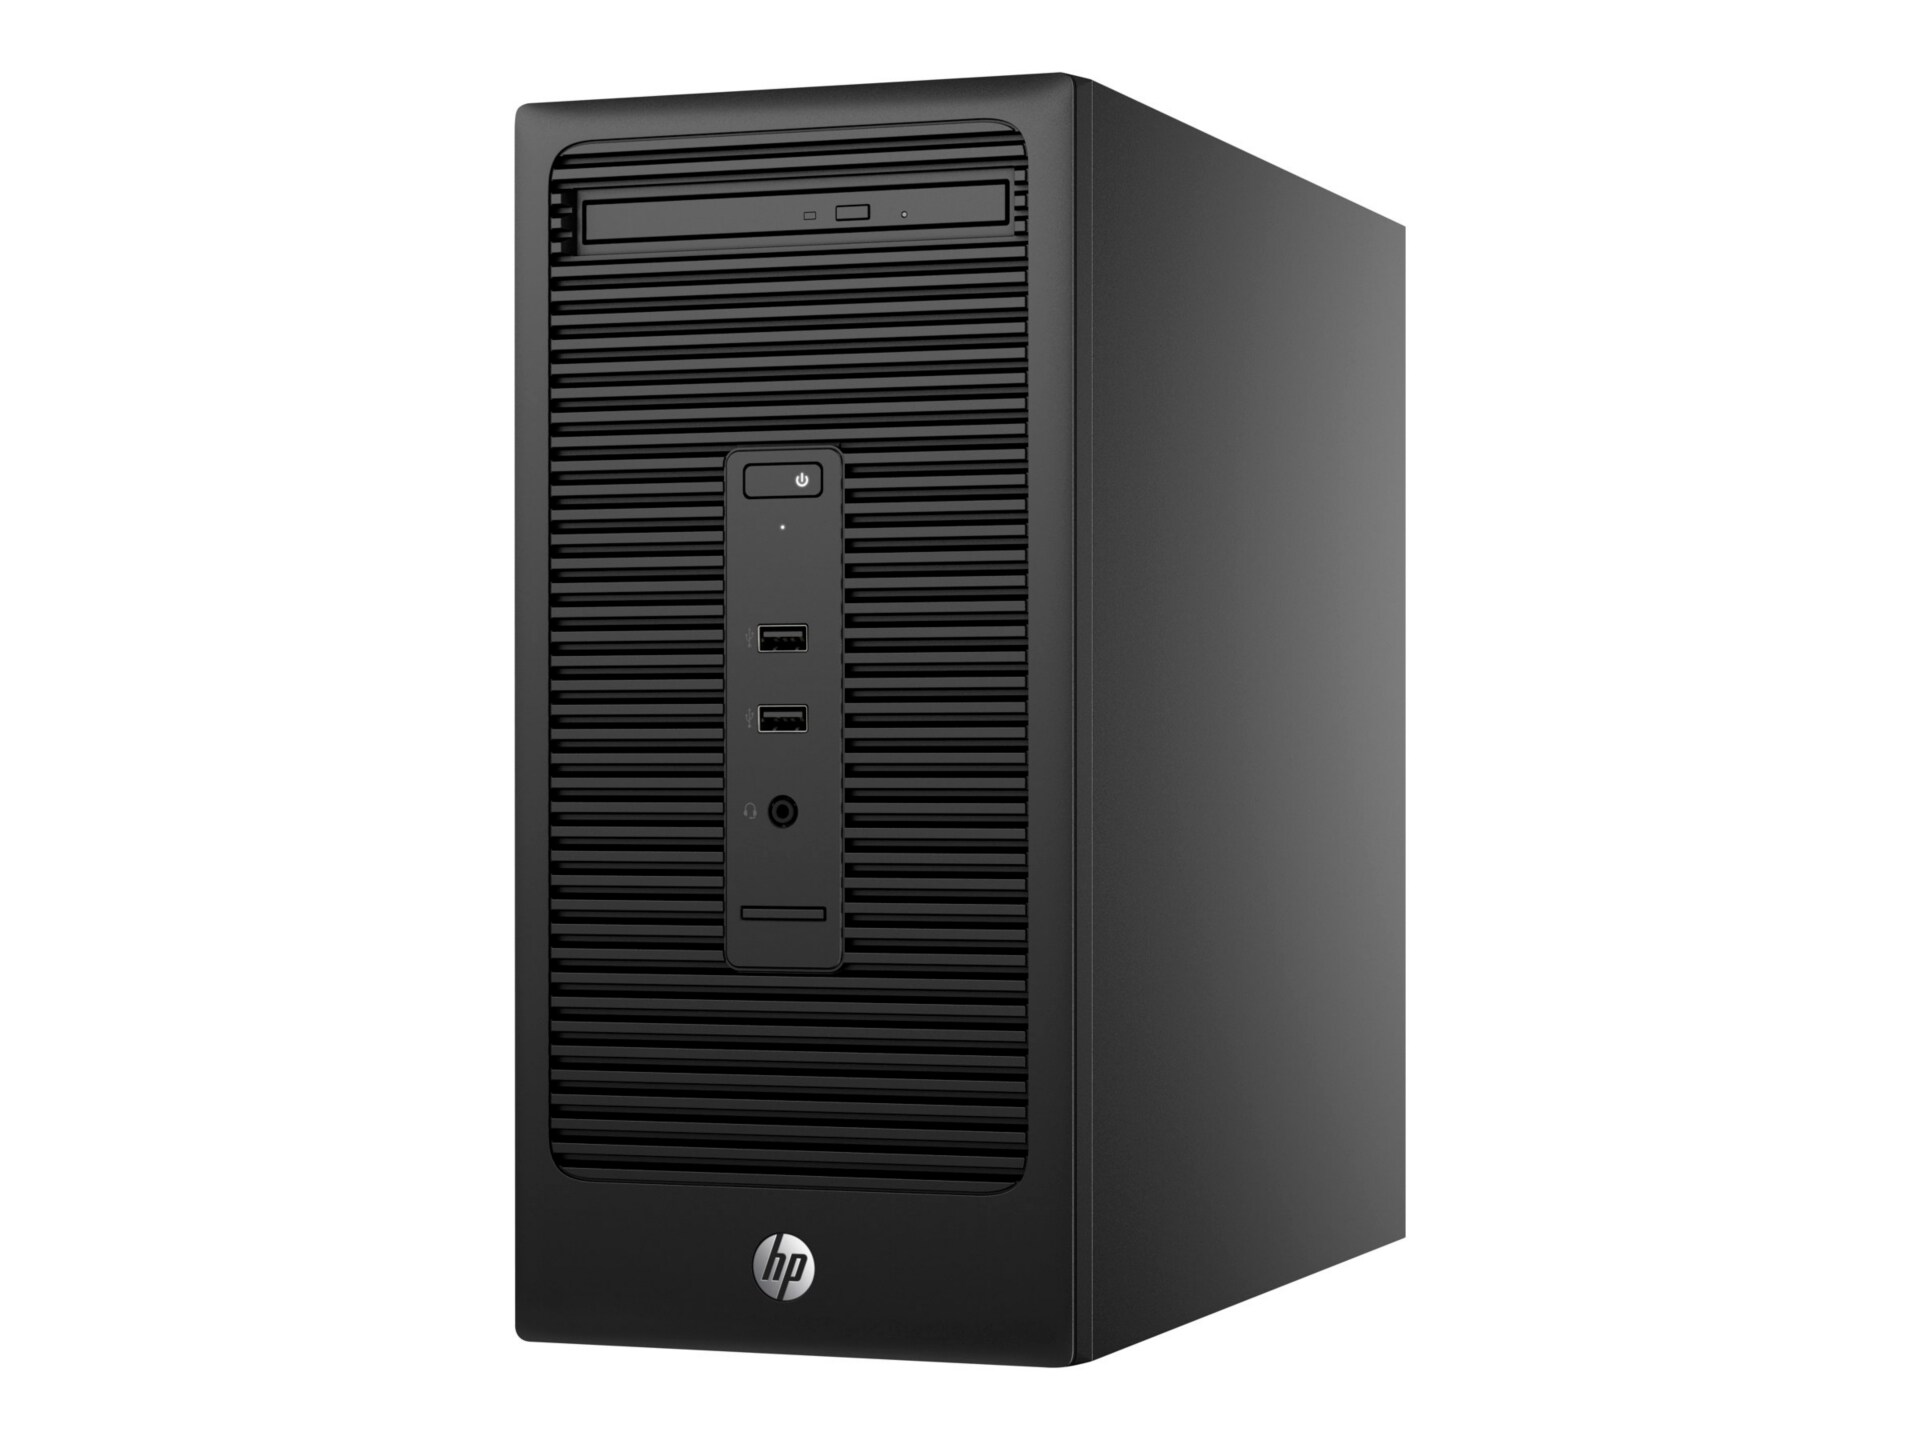 HP 280 G2 - micro tower - Core i5 6500 3.2 GHz - 4 GB - 500 GB - QWERTY US